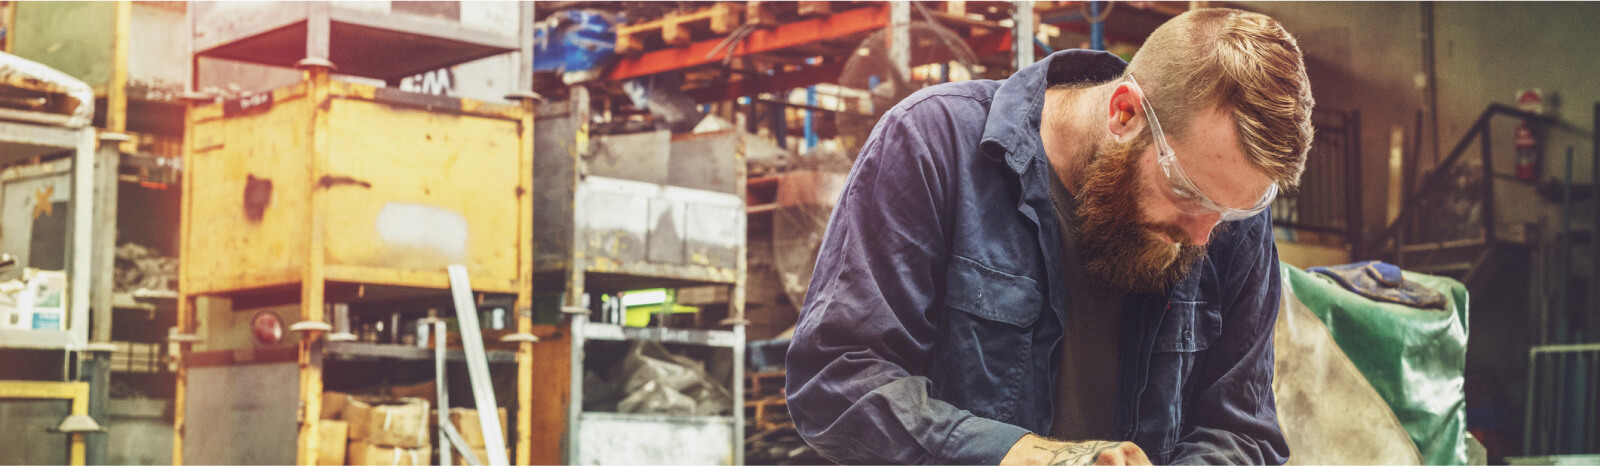 Blue collar worker wearing safety glasses